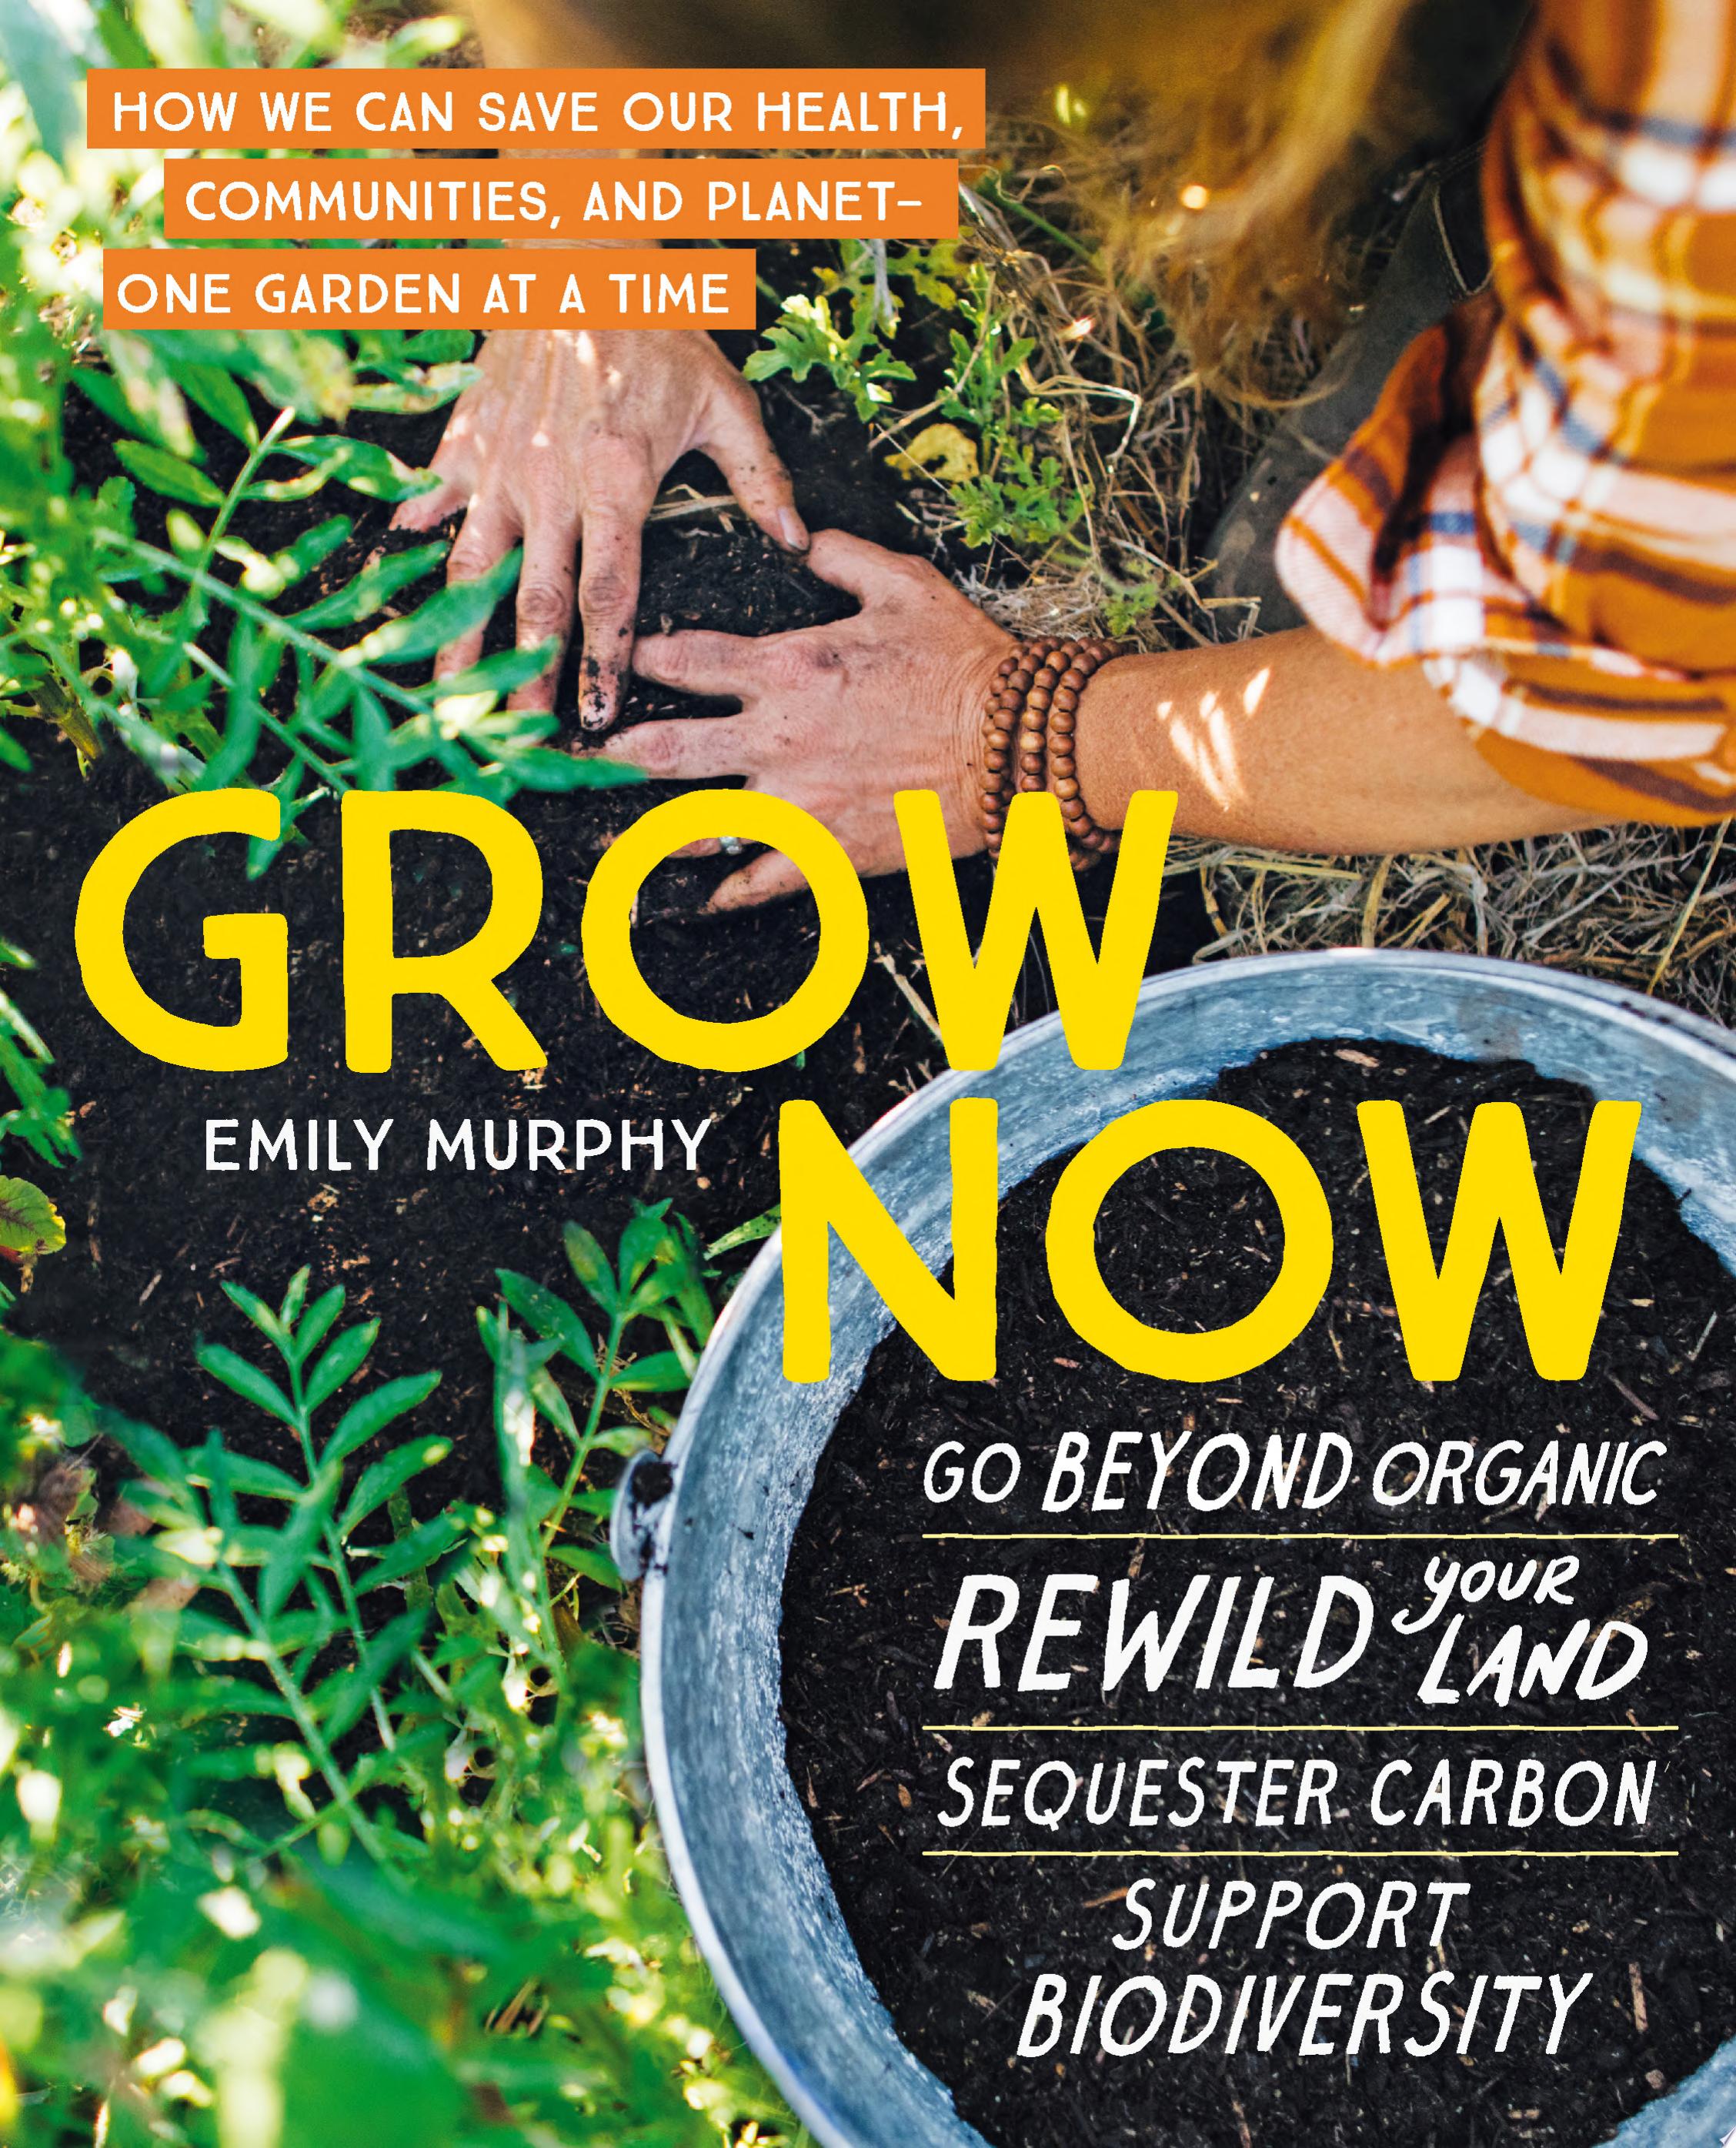 Image for "Grow Now"